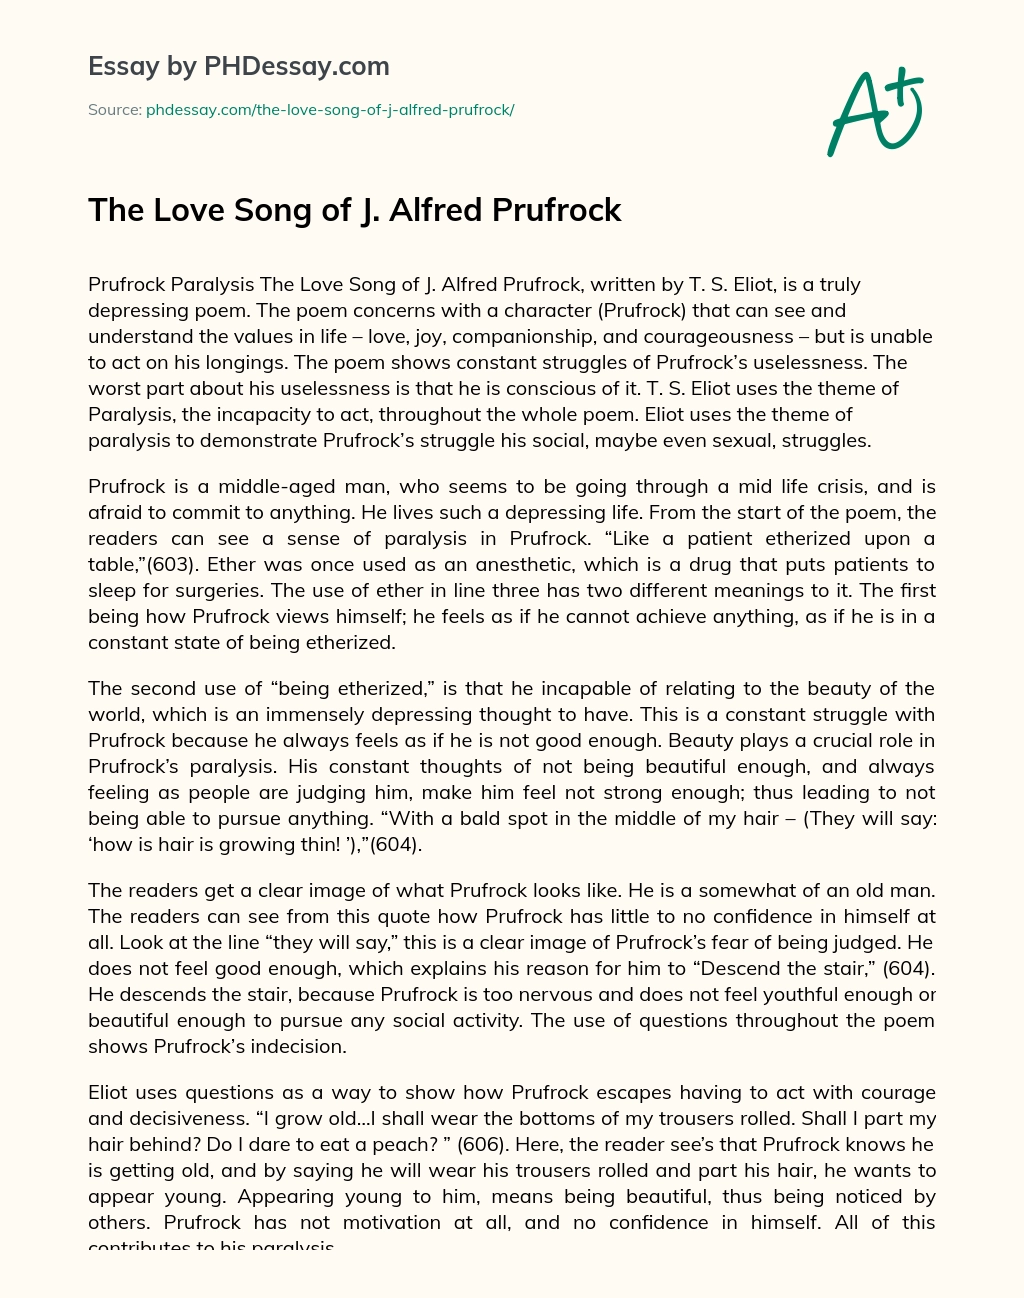 The Love Song of J. Alfred Prufrock essay